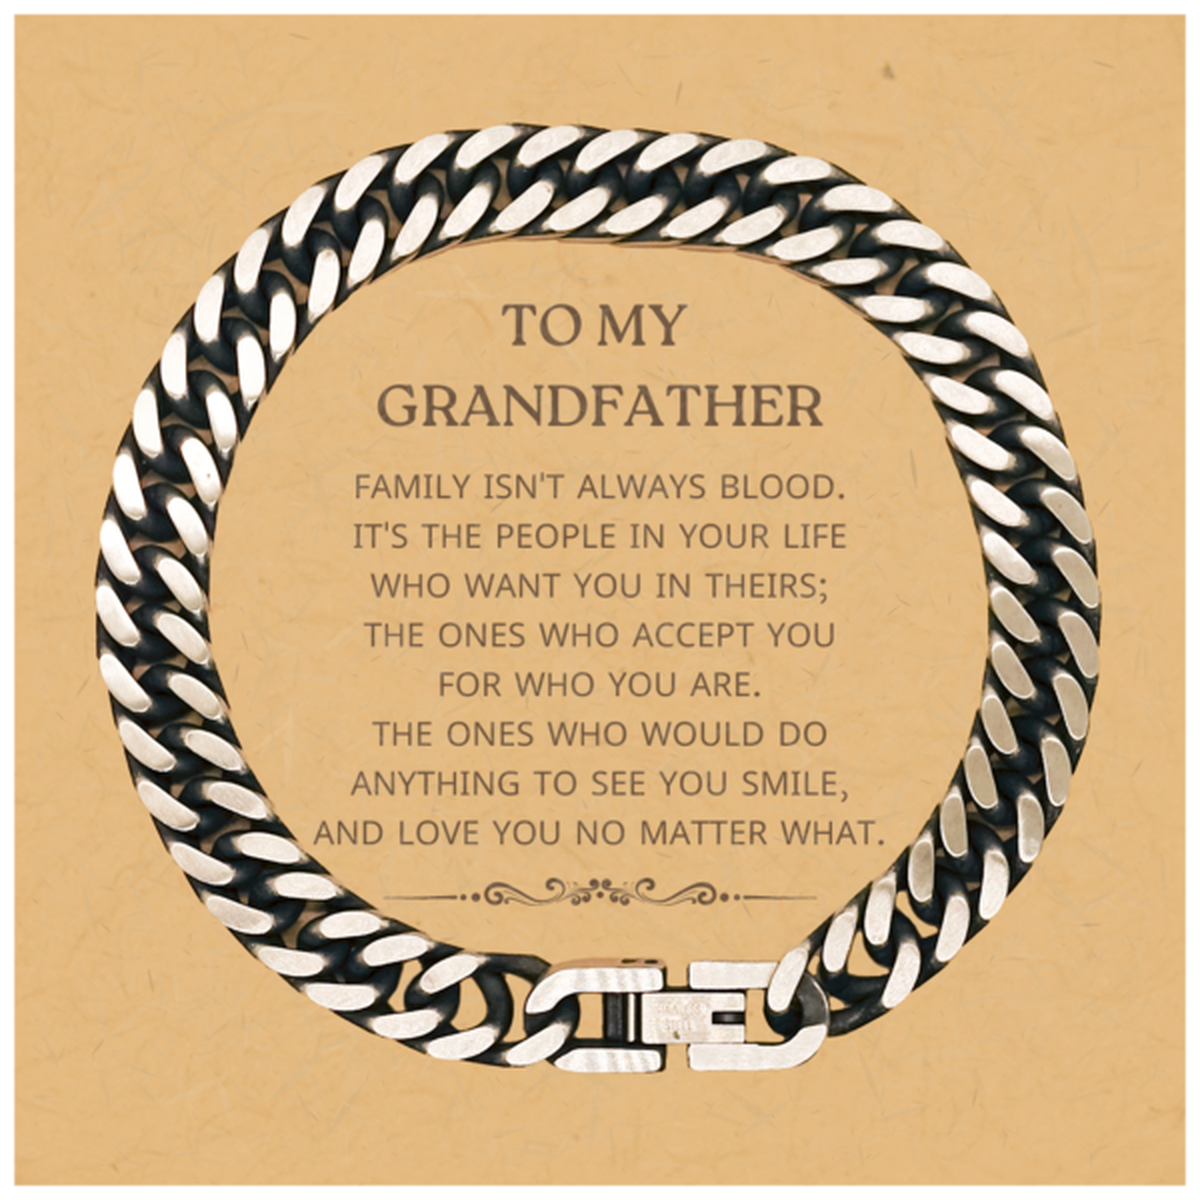 To My Grandfather Gifts, Family isn't always blood, Grandfather Cuban Link Chain Bracelet, Birthday Christmas Unique Present For Grandfather